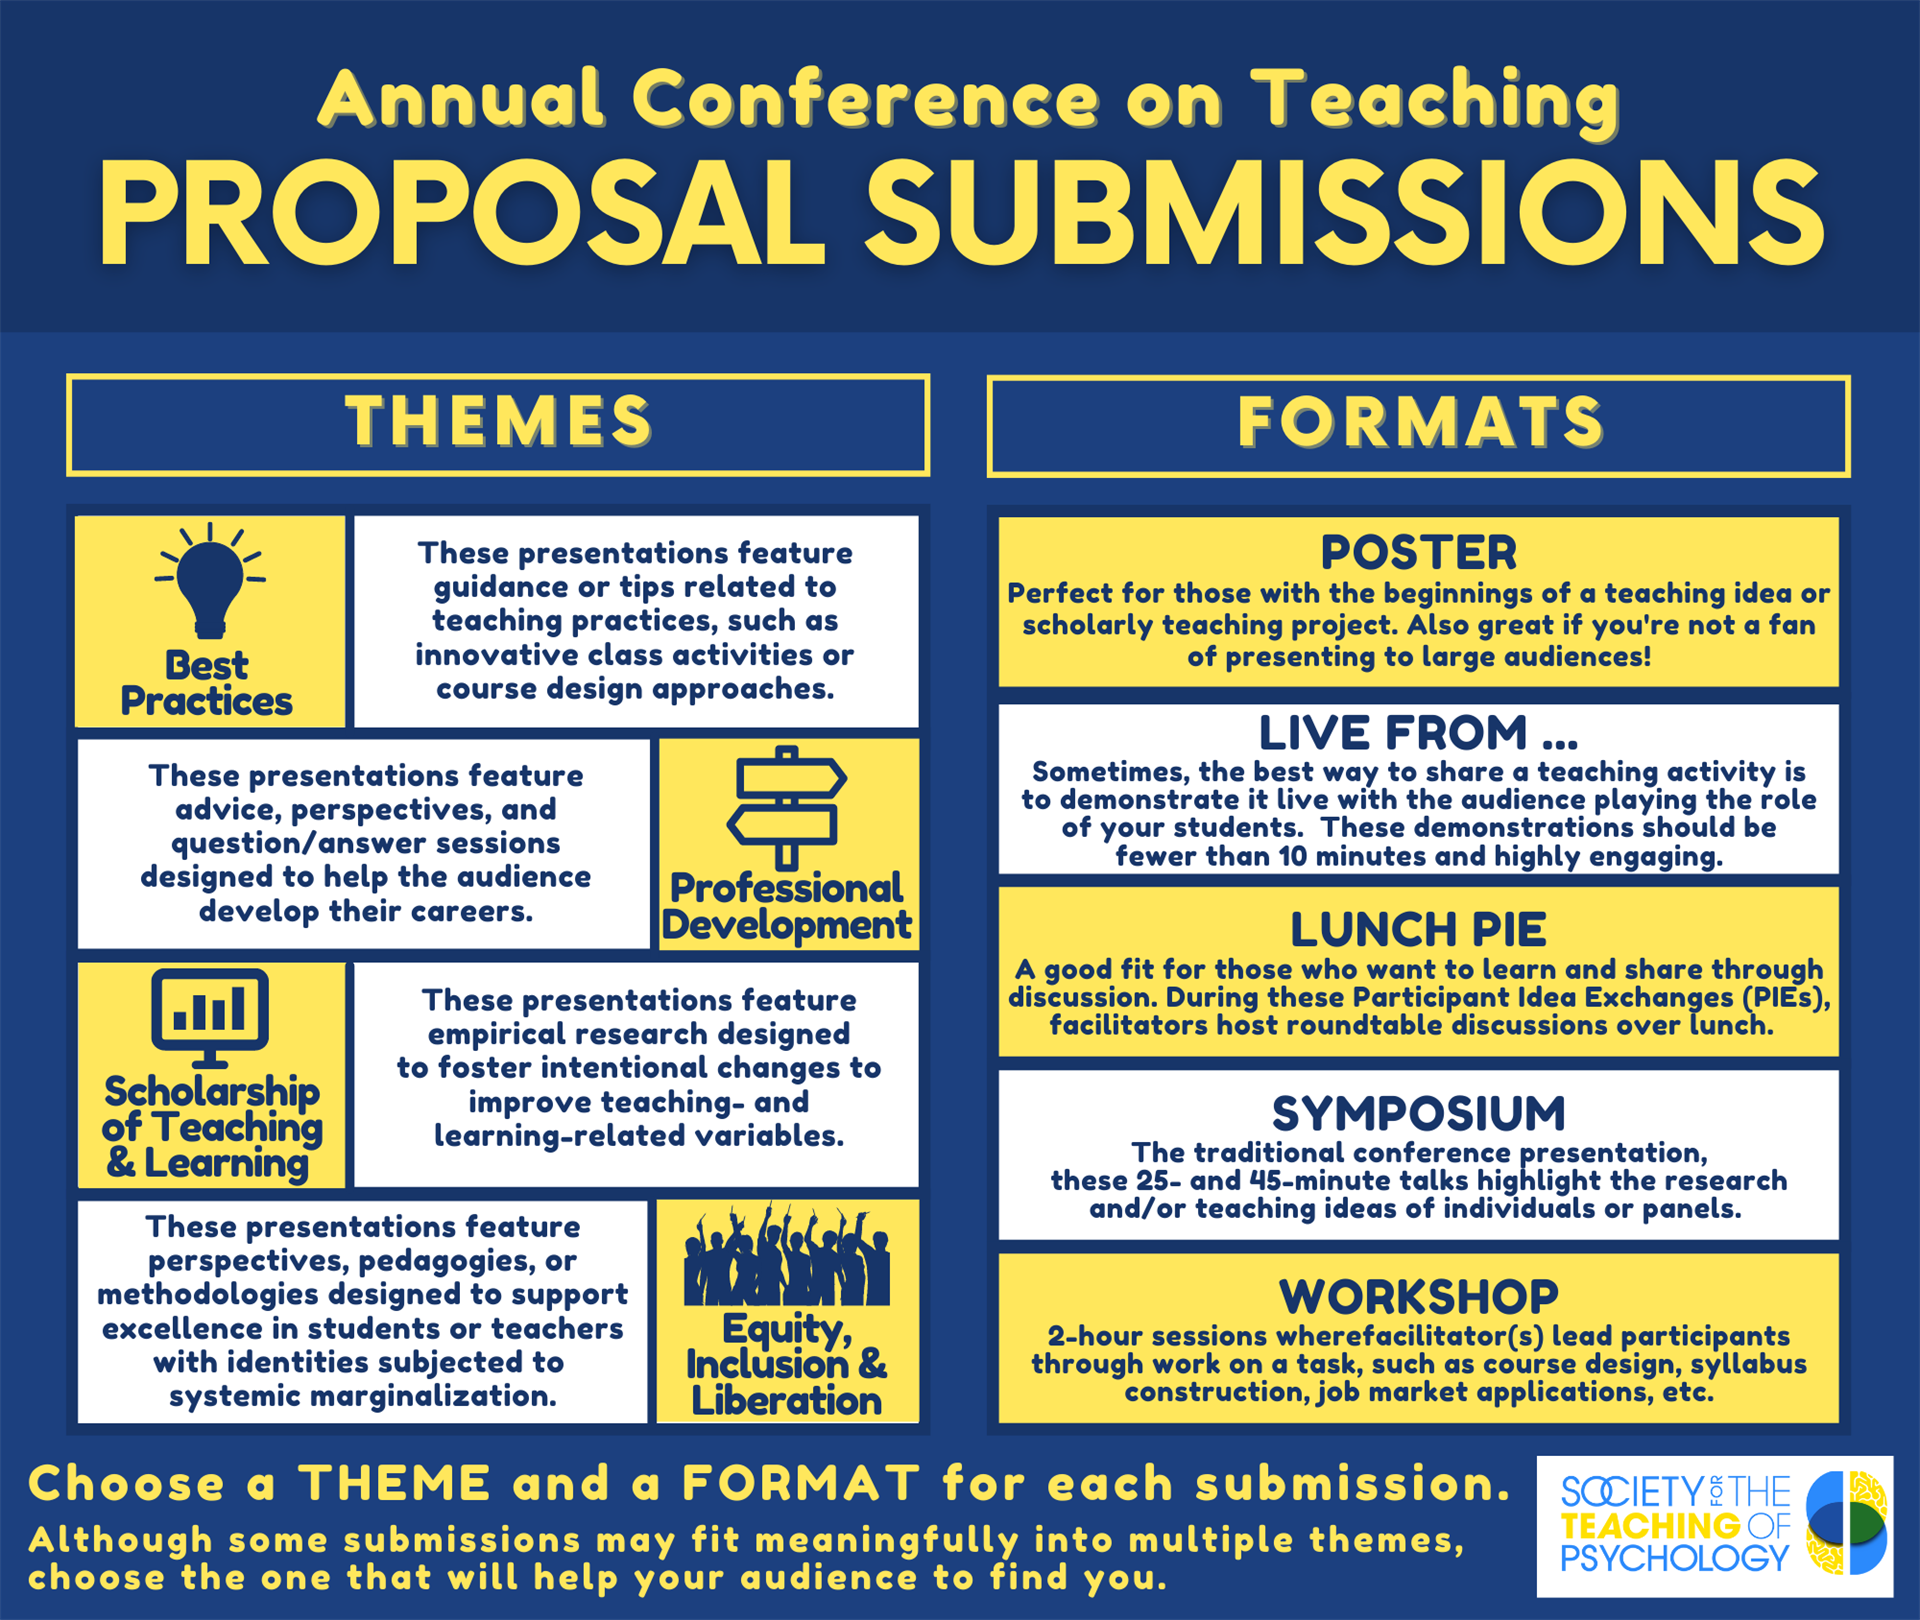 Information regarding the themes and formats for proposal submissions. For a text-based version of this information, click the hyperlink below the image.